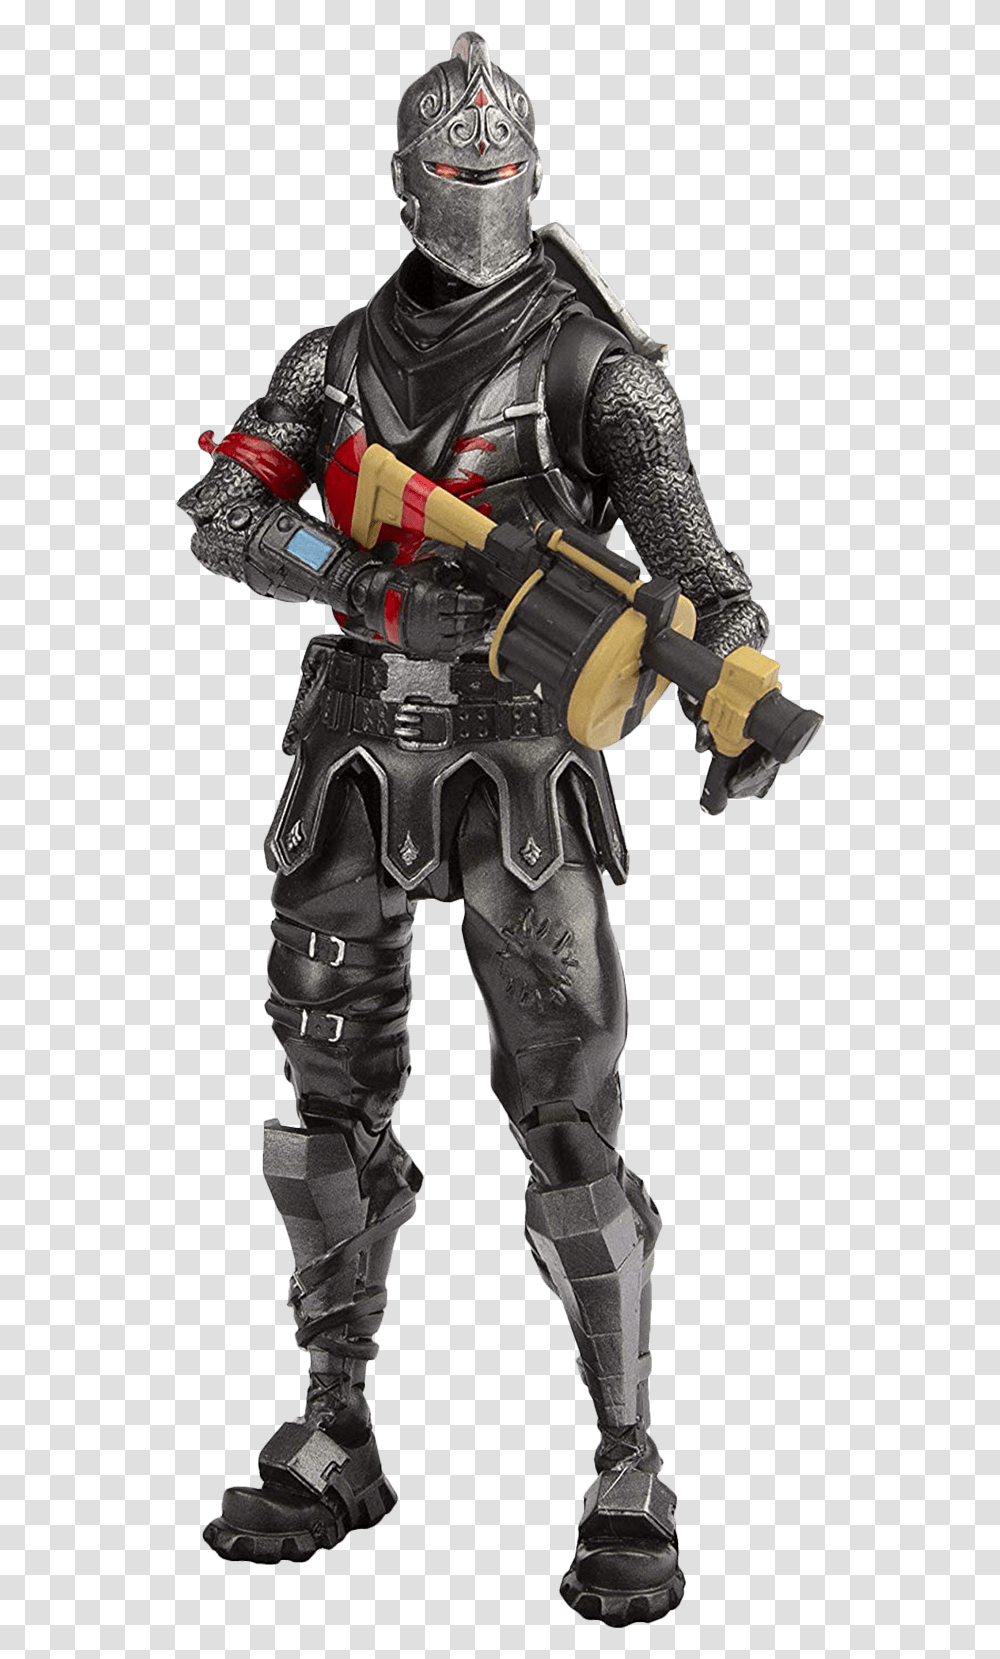 Fortnite Action Figure Black Knight Fortnite Toy, Armor, Person, Human, Costume Transparent Png